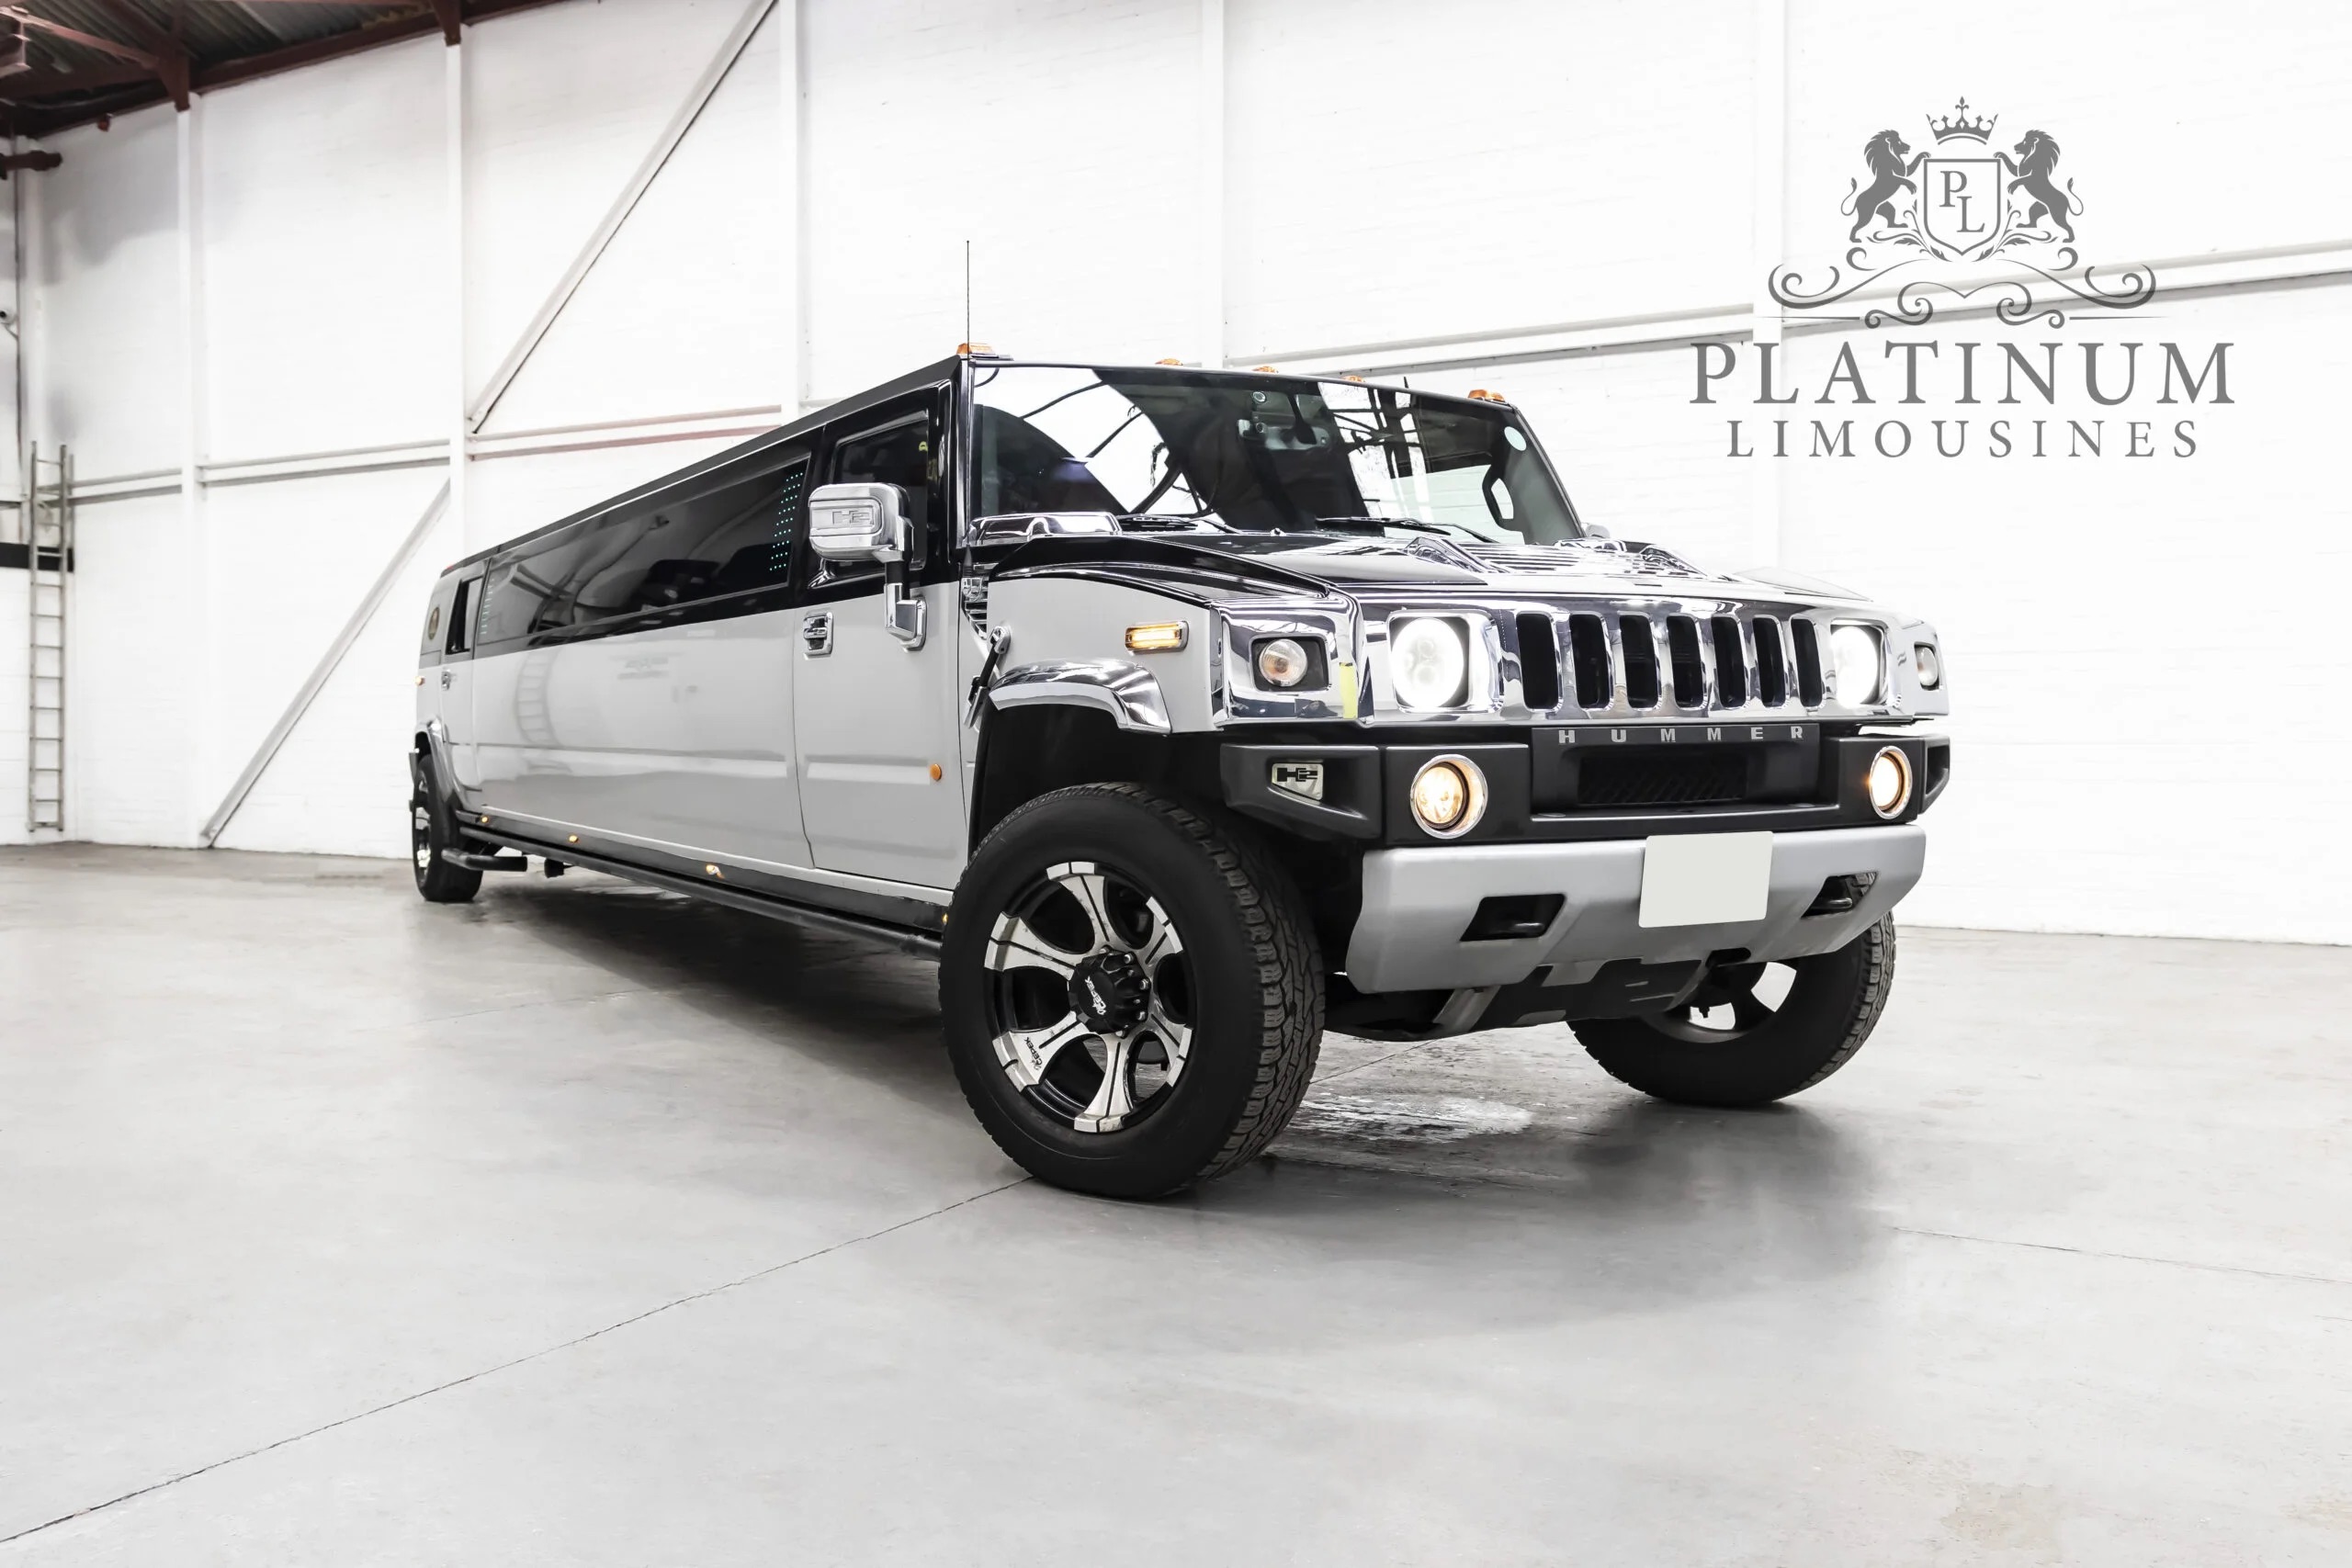 Why Choose a Hummer Limo for Your Next Big Event in Wolverton and Greenleys